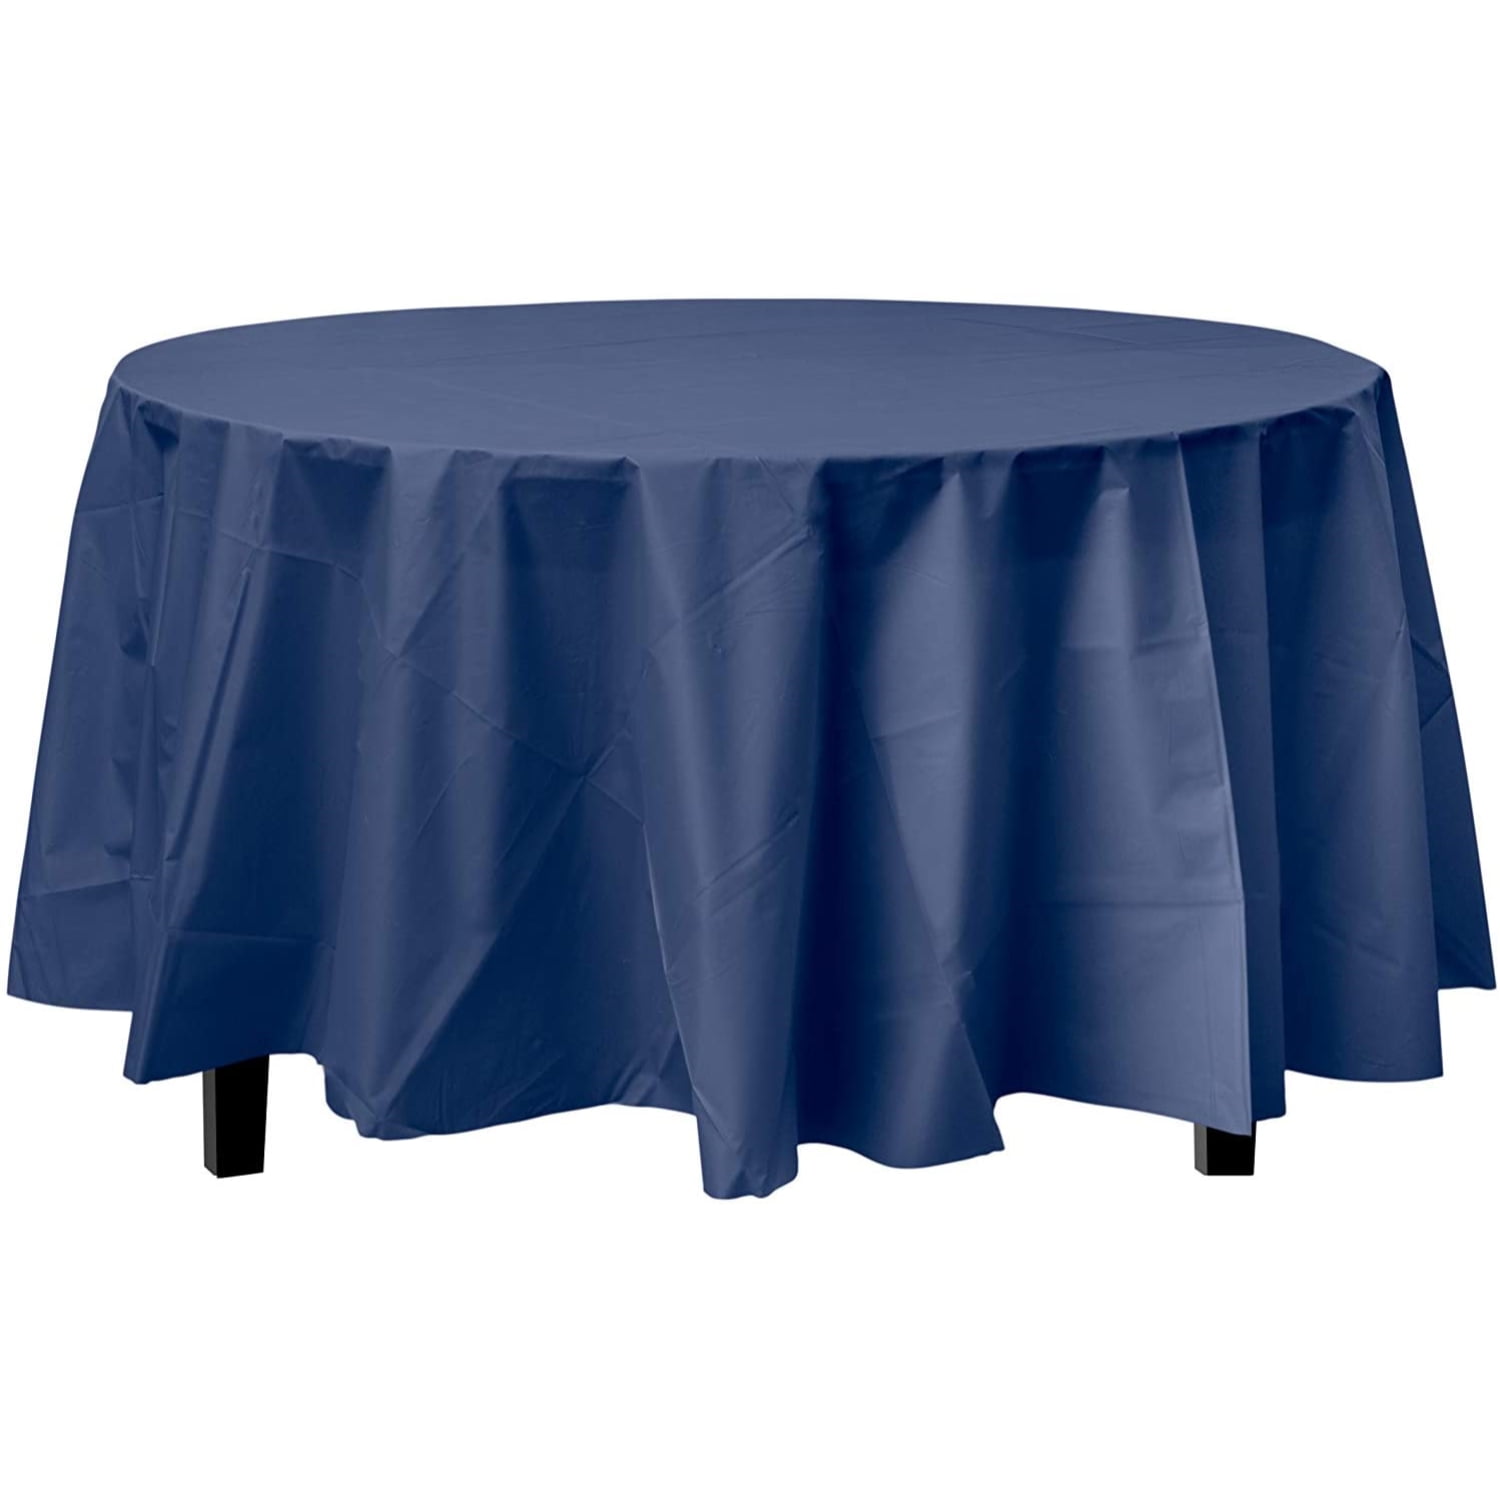 Bulk Premium Plastic Disposable 84 Inch, What Size Tablecloth For A 44 Inch Round Table